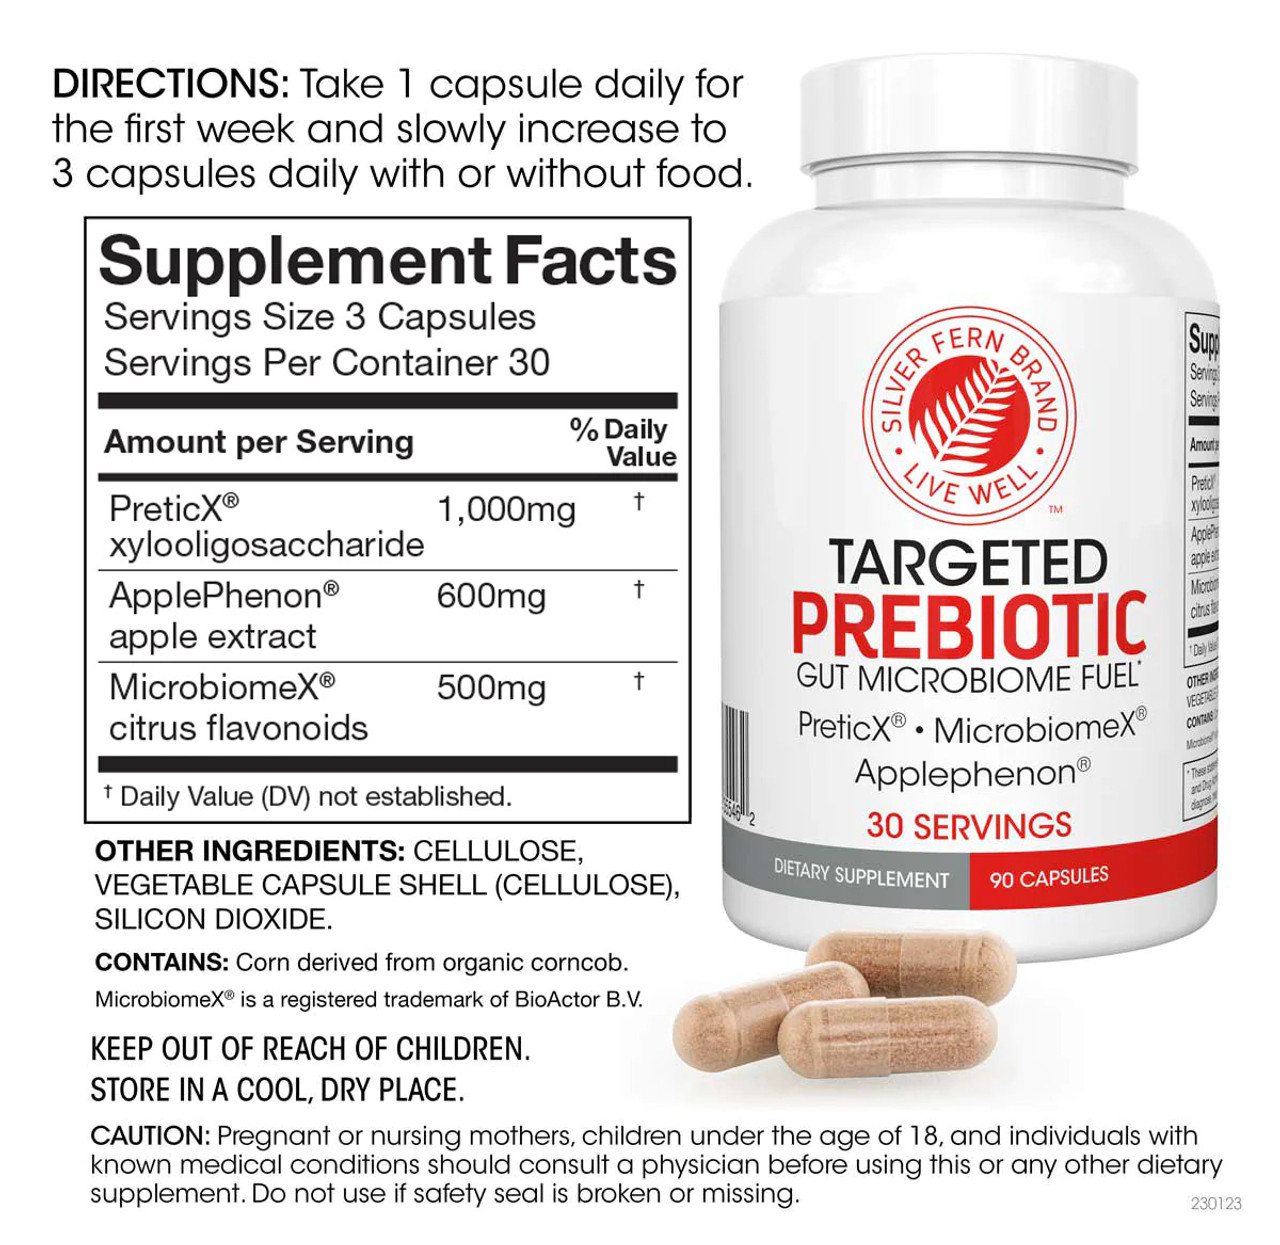 Silver Fern Brand Targeted Prebiotic - 1 Bottle - 90 Capsules - 30 Servings - Gut Health Supplment With Preticx, ApplePhenon & Microbiome X - Feeds Critical Bacteria Strains: Akkermansia Muciniphila & Others